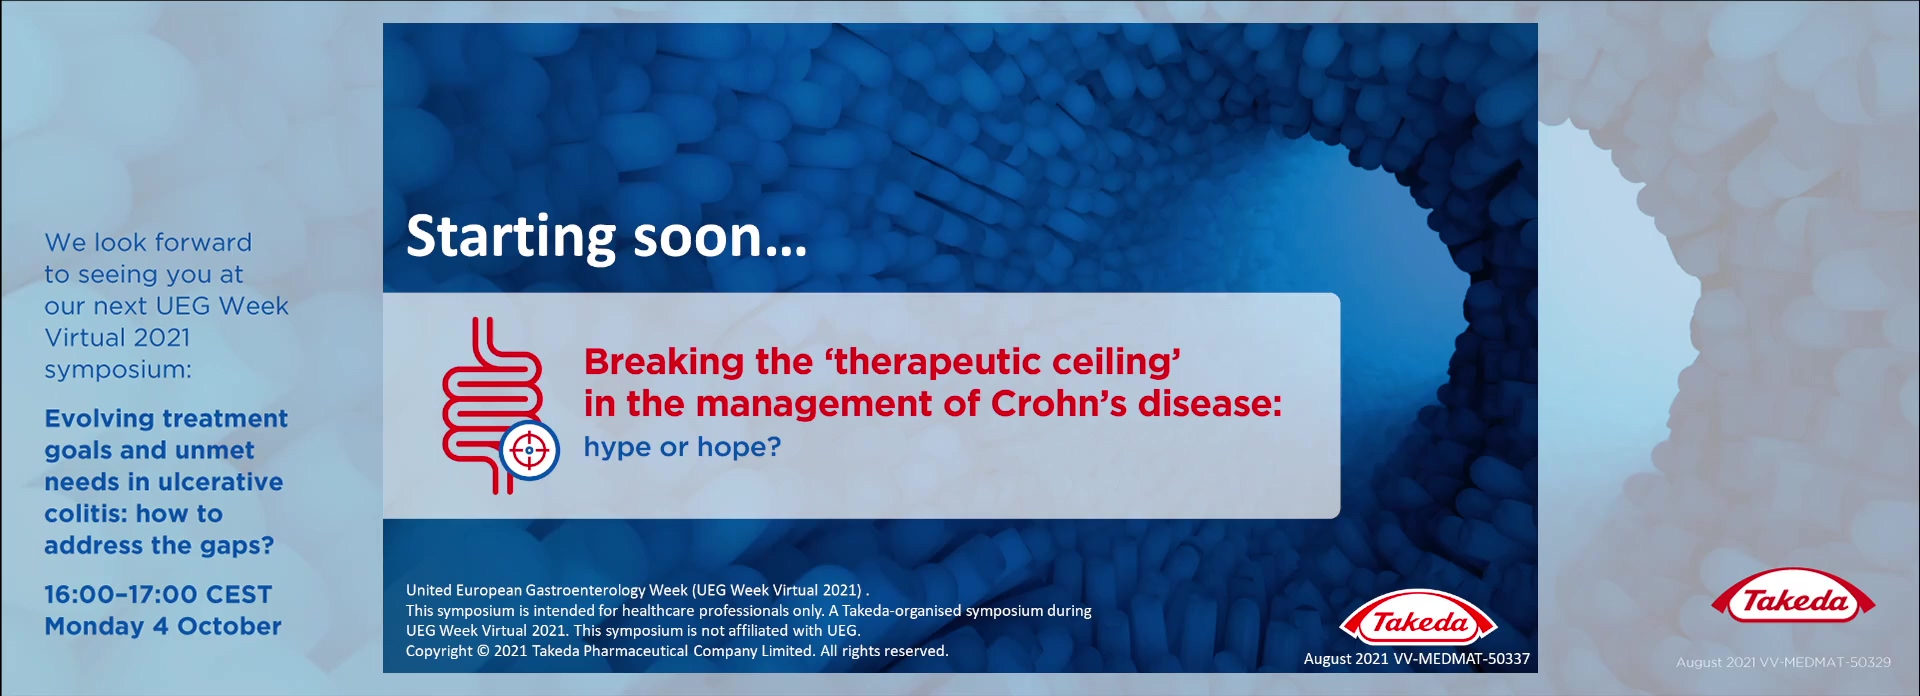 Breaking the ‘therapeutic ceiling’ in the management of Crohn’s disease: hype or hope? (Takeda Pharmaceuticals International AG)